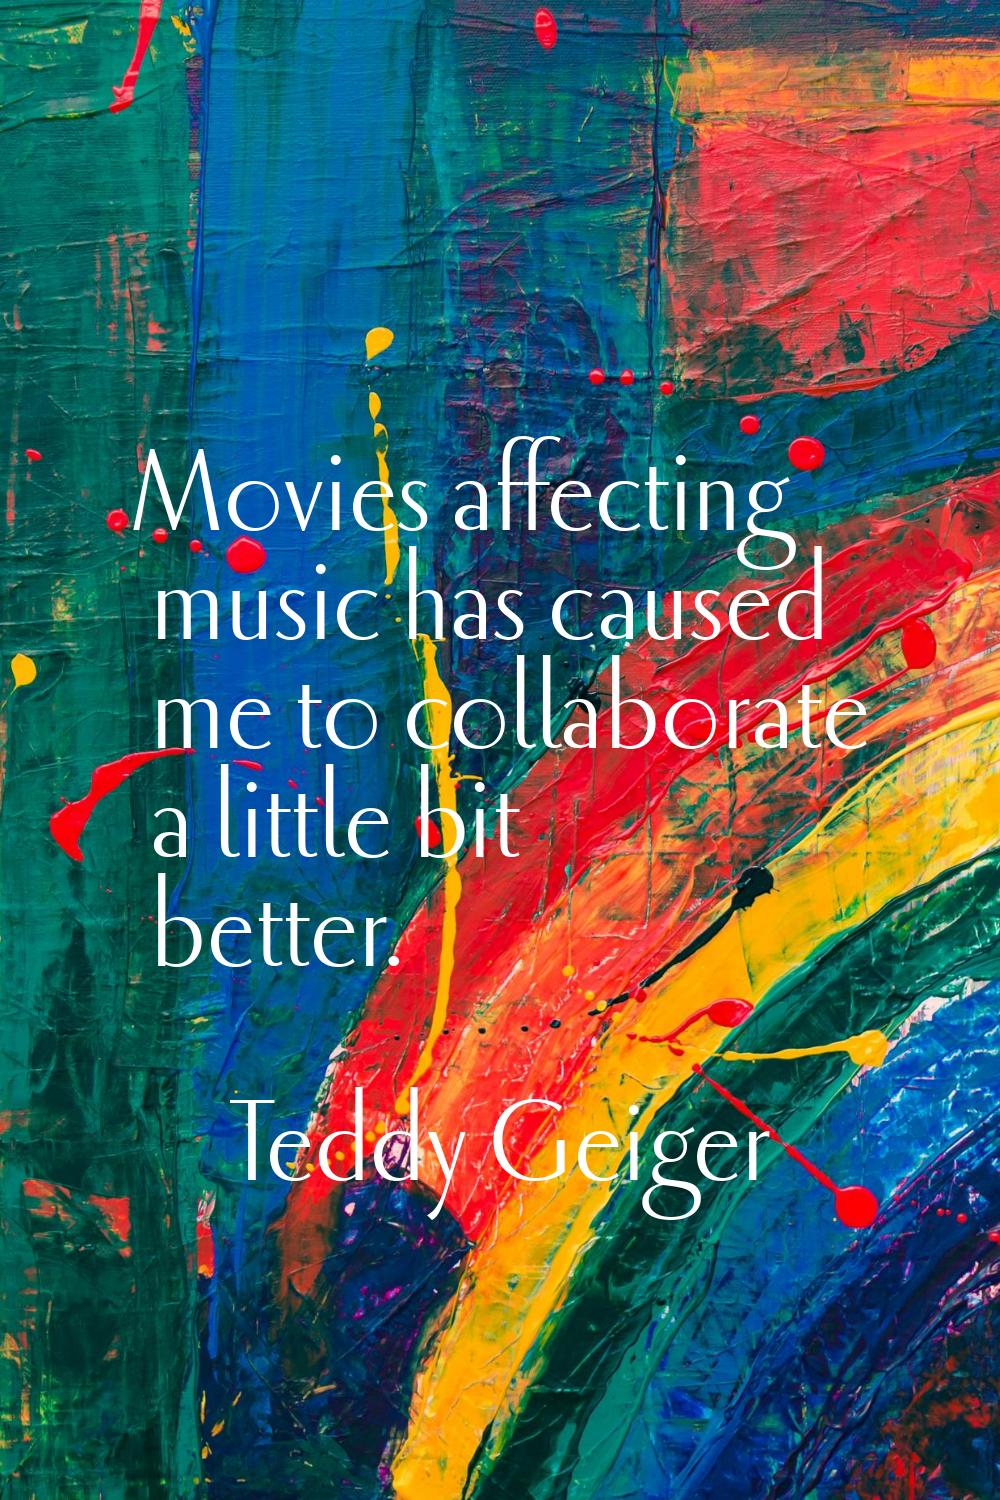 Movies affecting music has caused me to collaborate a little bit better.